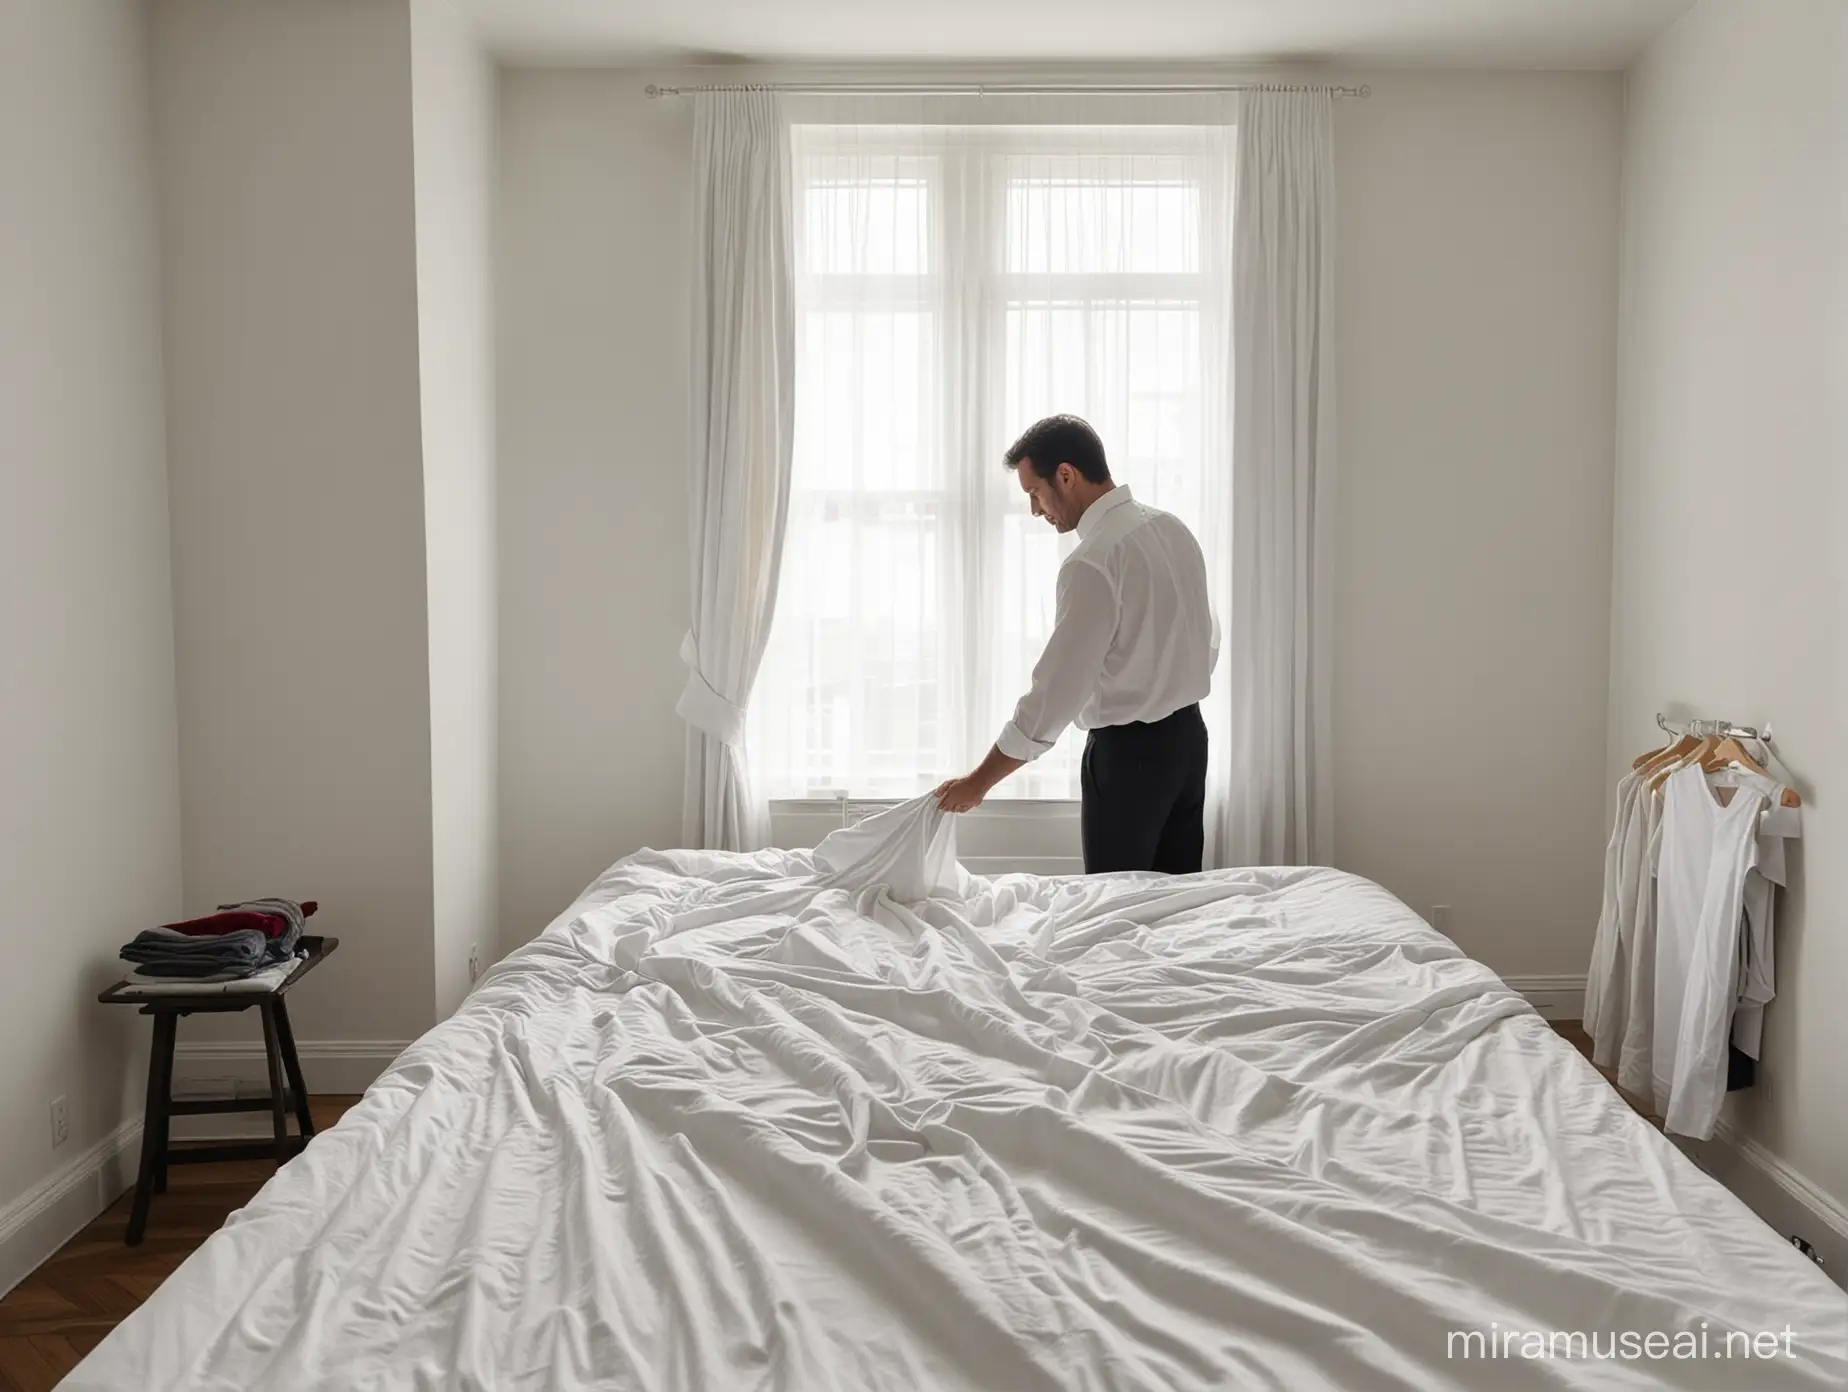 Man Standing by Window with Folded Clothing on Bed